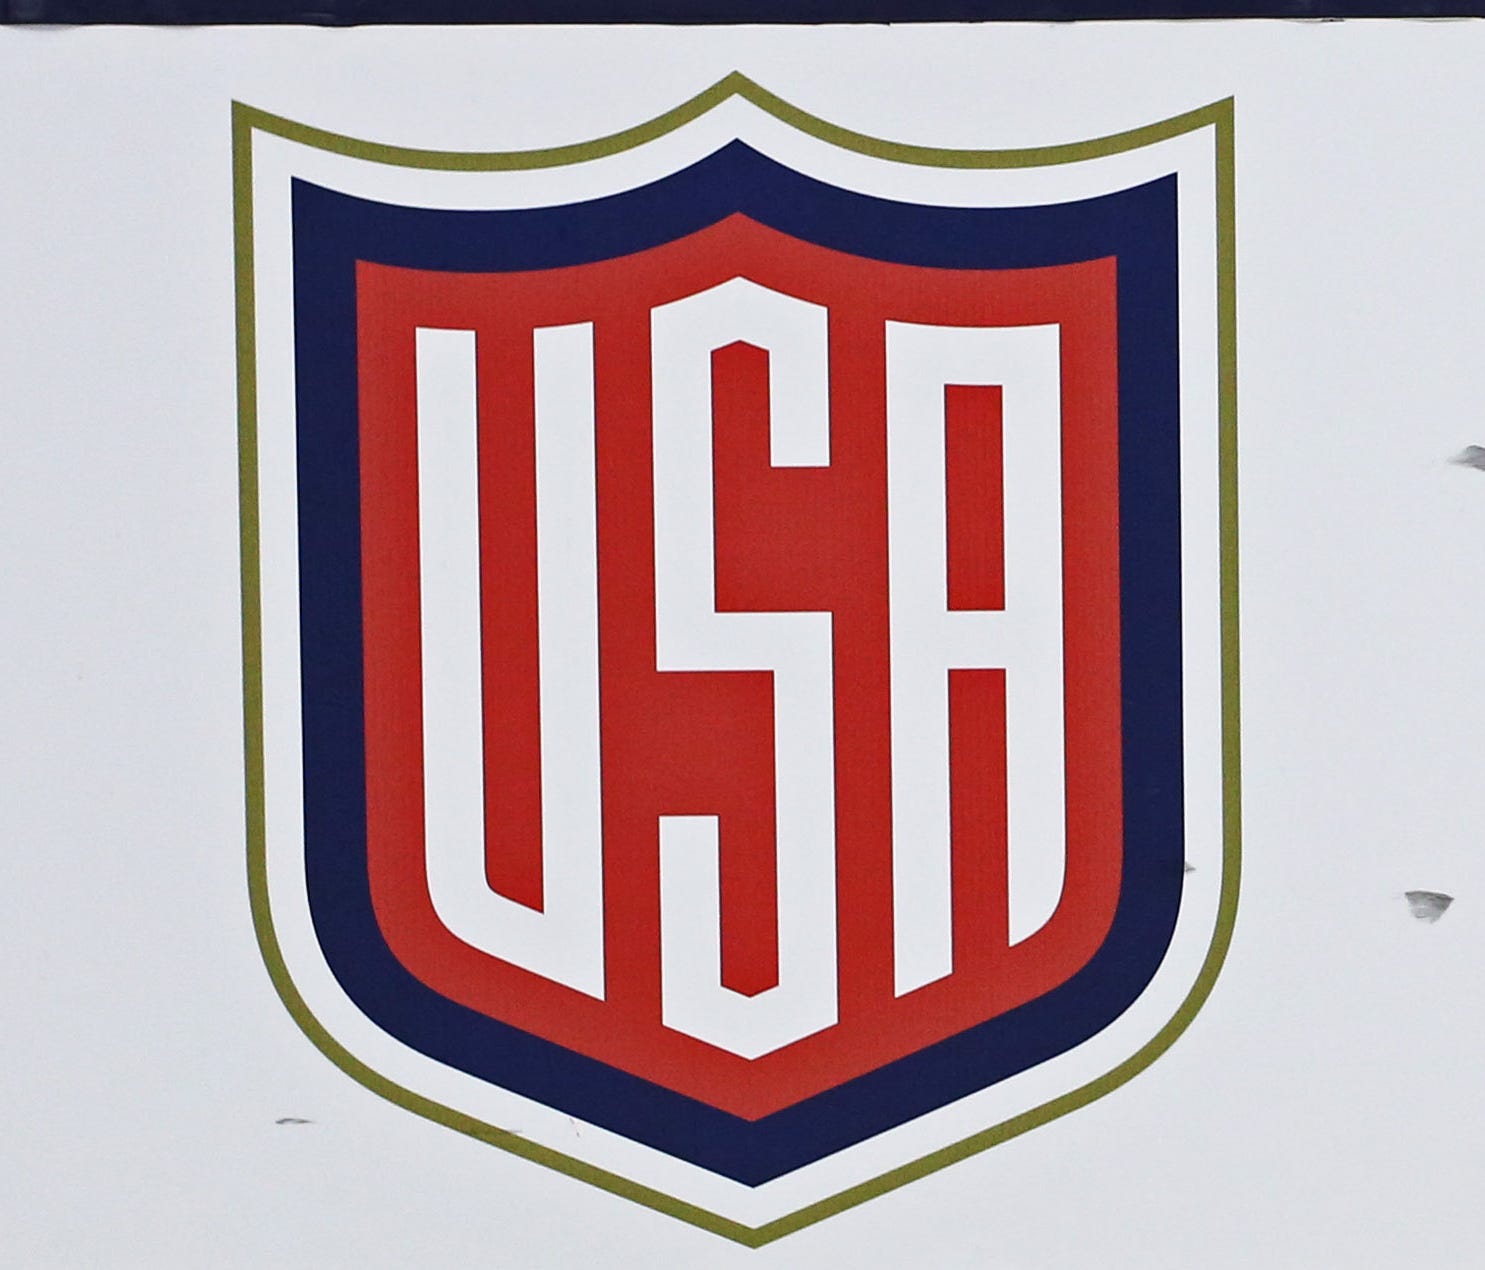 A view of the logo for Team USA.